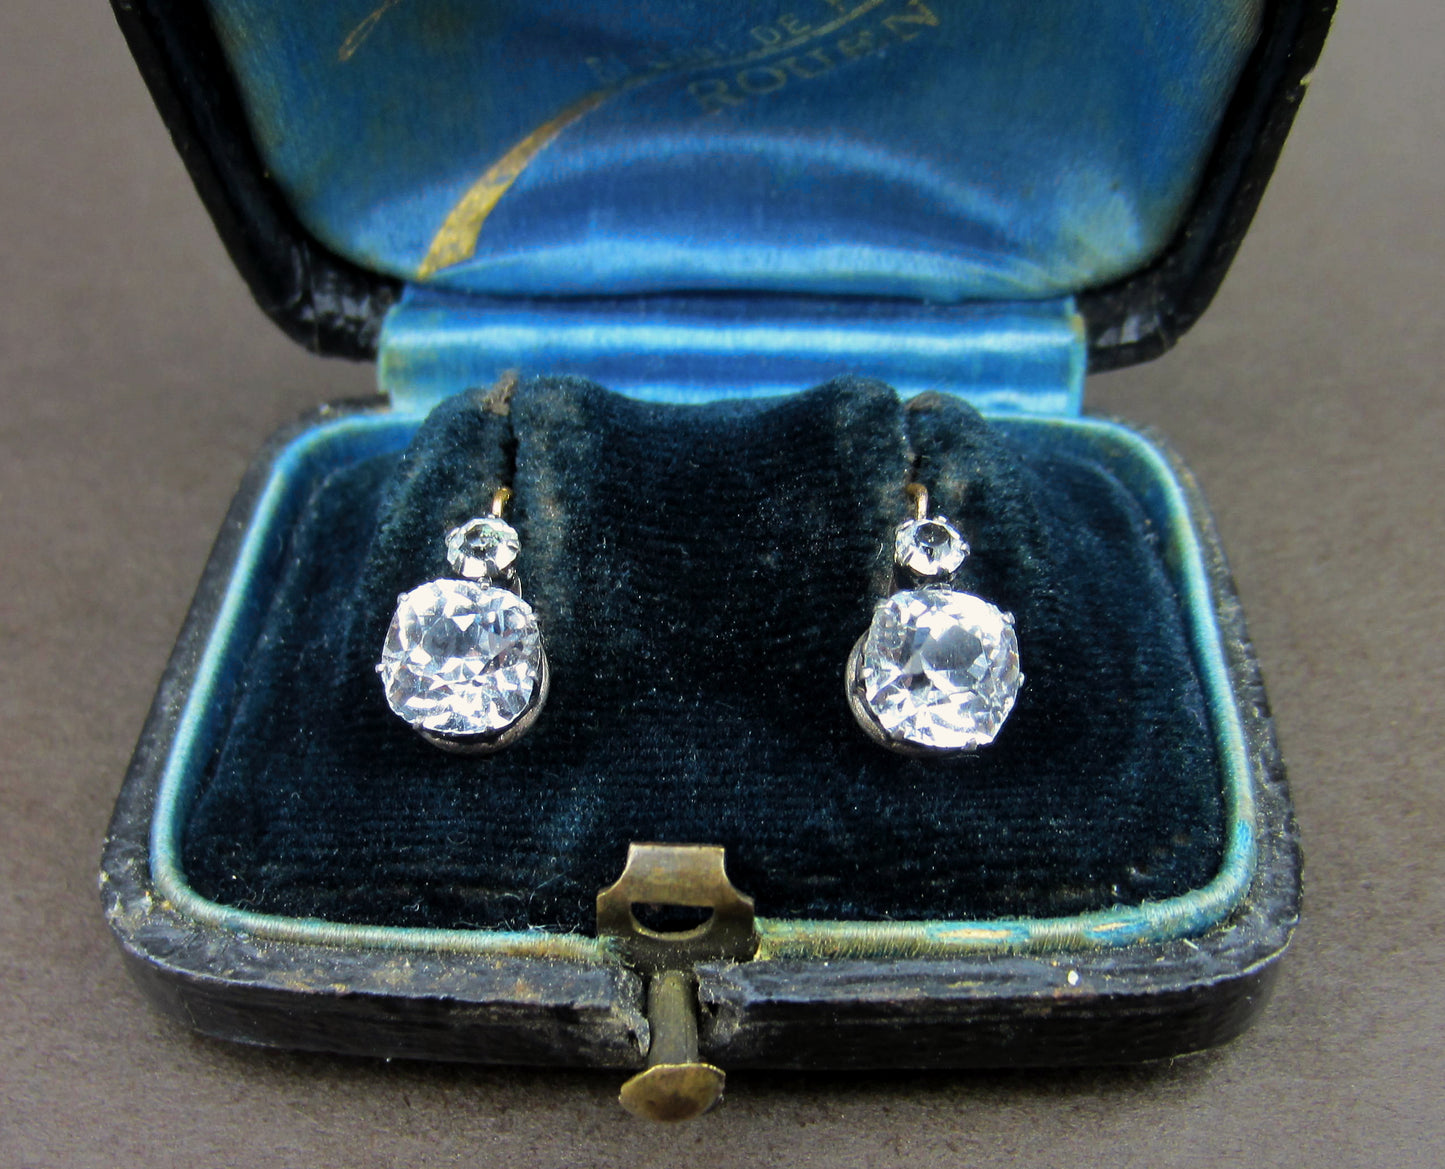 SOLD--French Victorian Paste Earrings Silver/18k in Original Box c. 1880